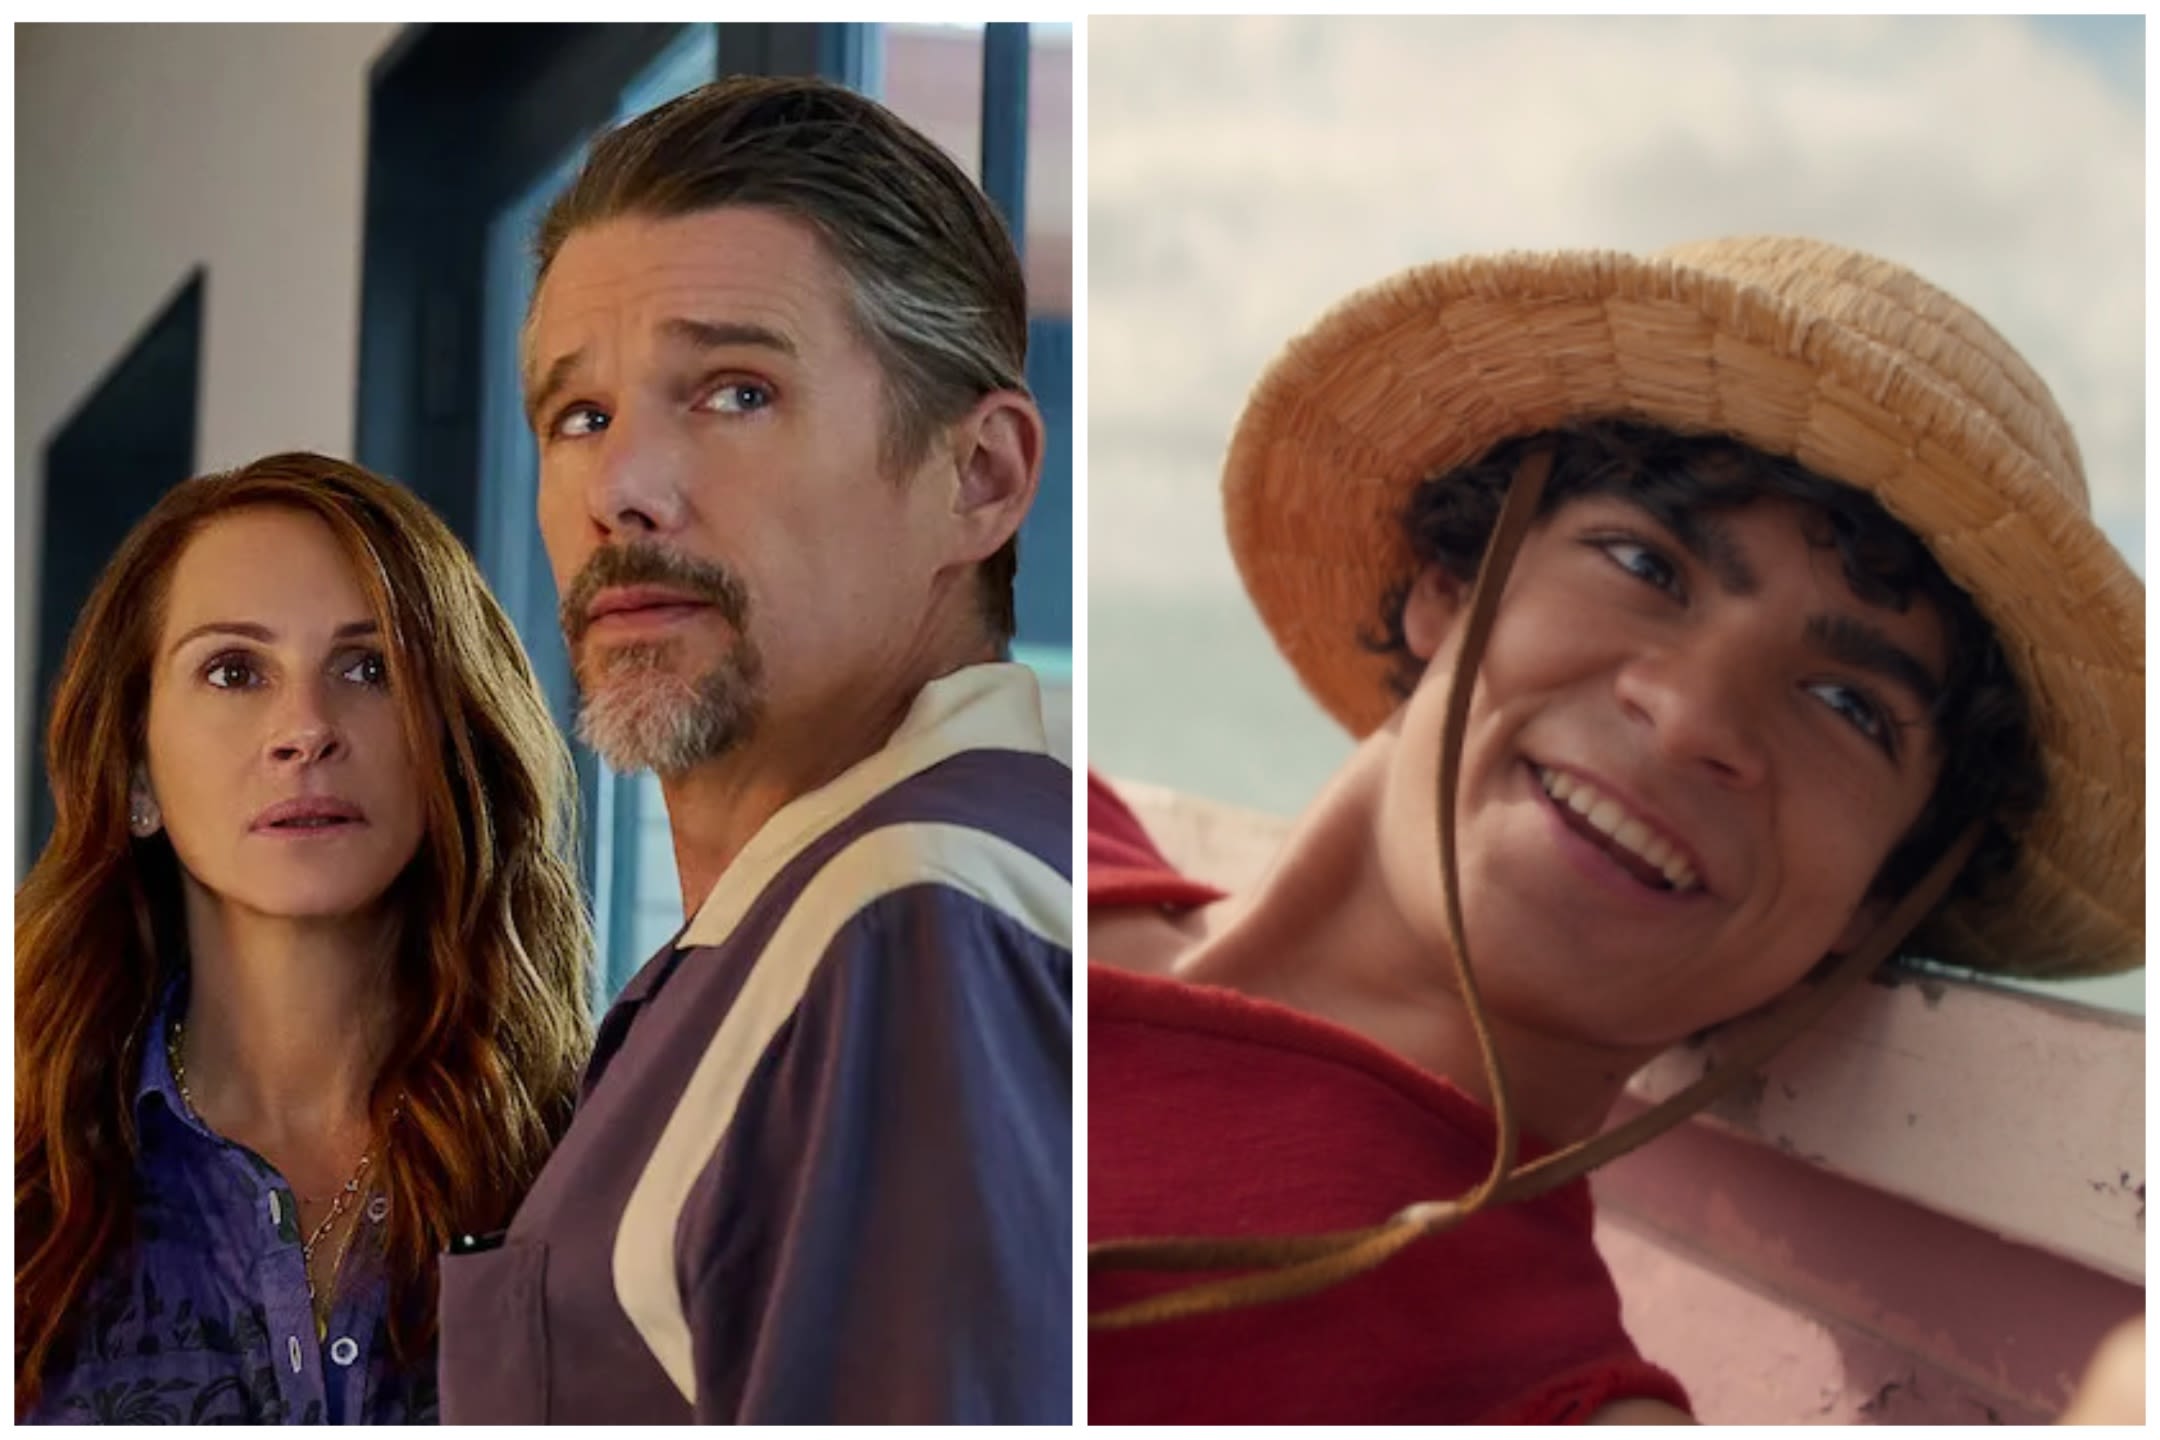 ...Tops All Netflix Viewing for Second Half of 2023 With 121 Million Views, ‘One Piece’ Leads TV With 71.6 Million Views